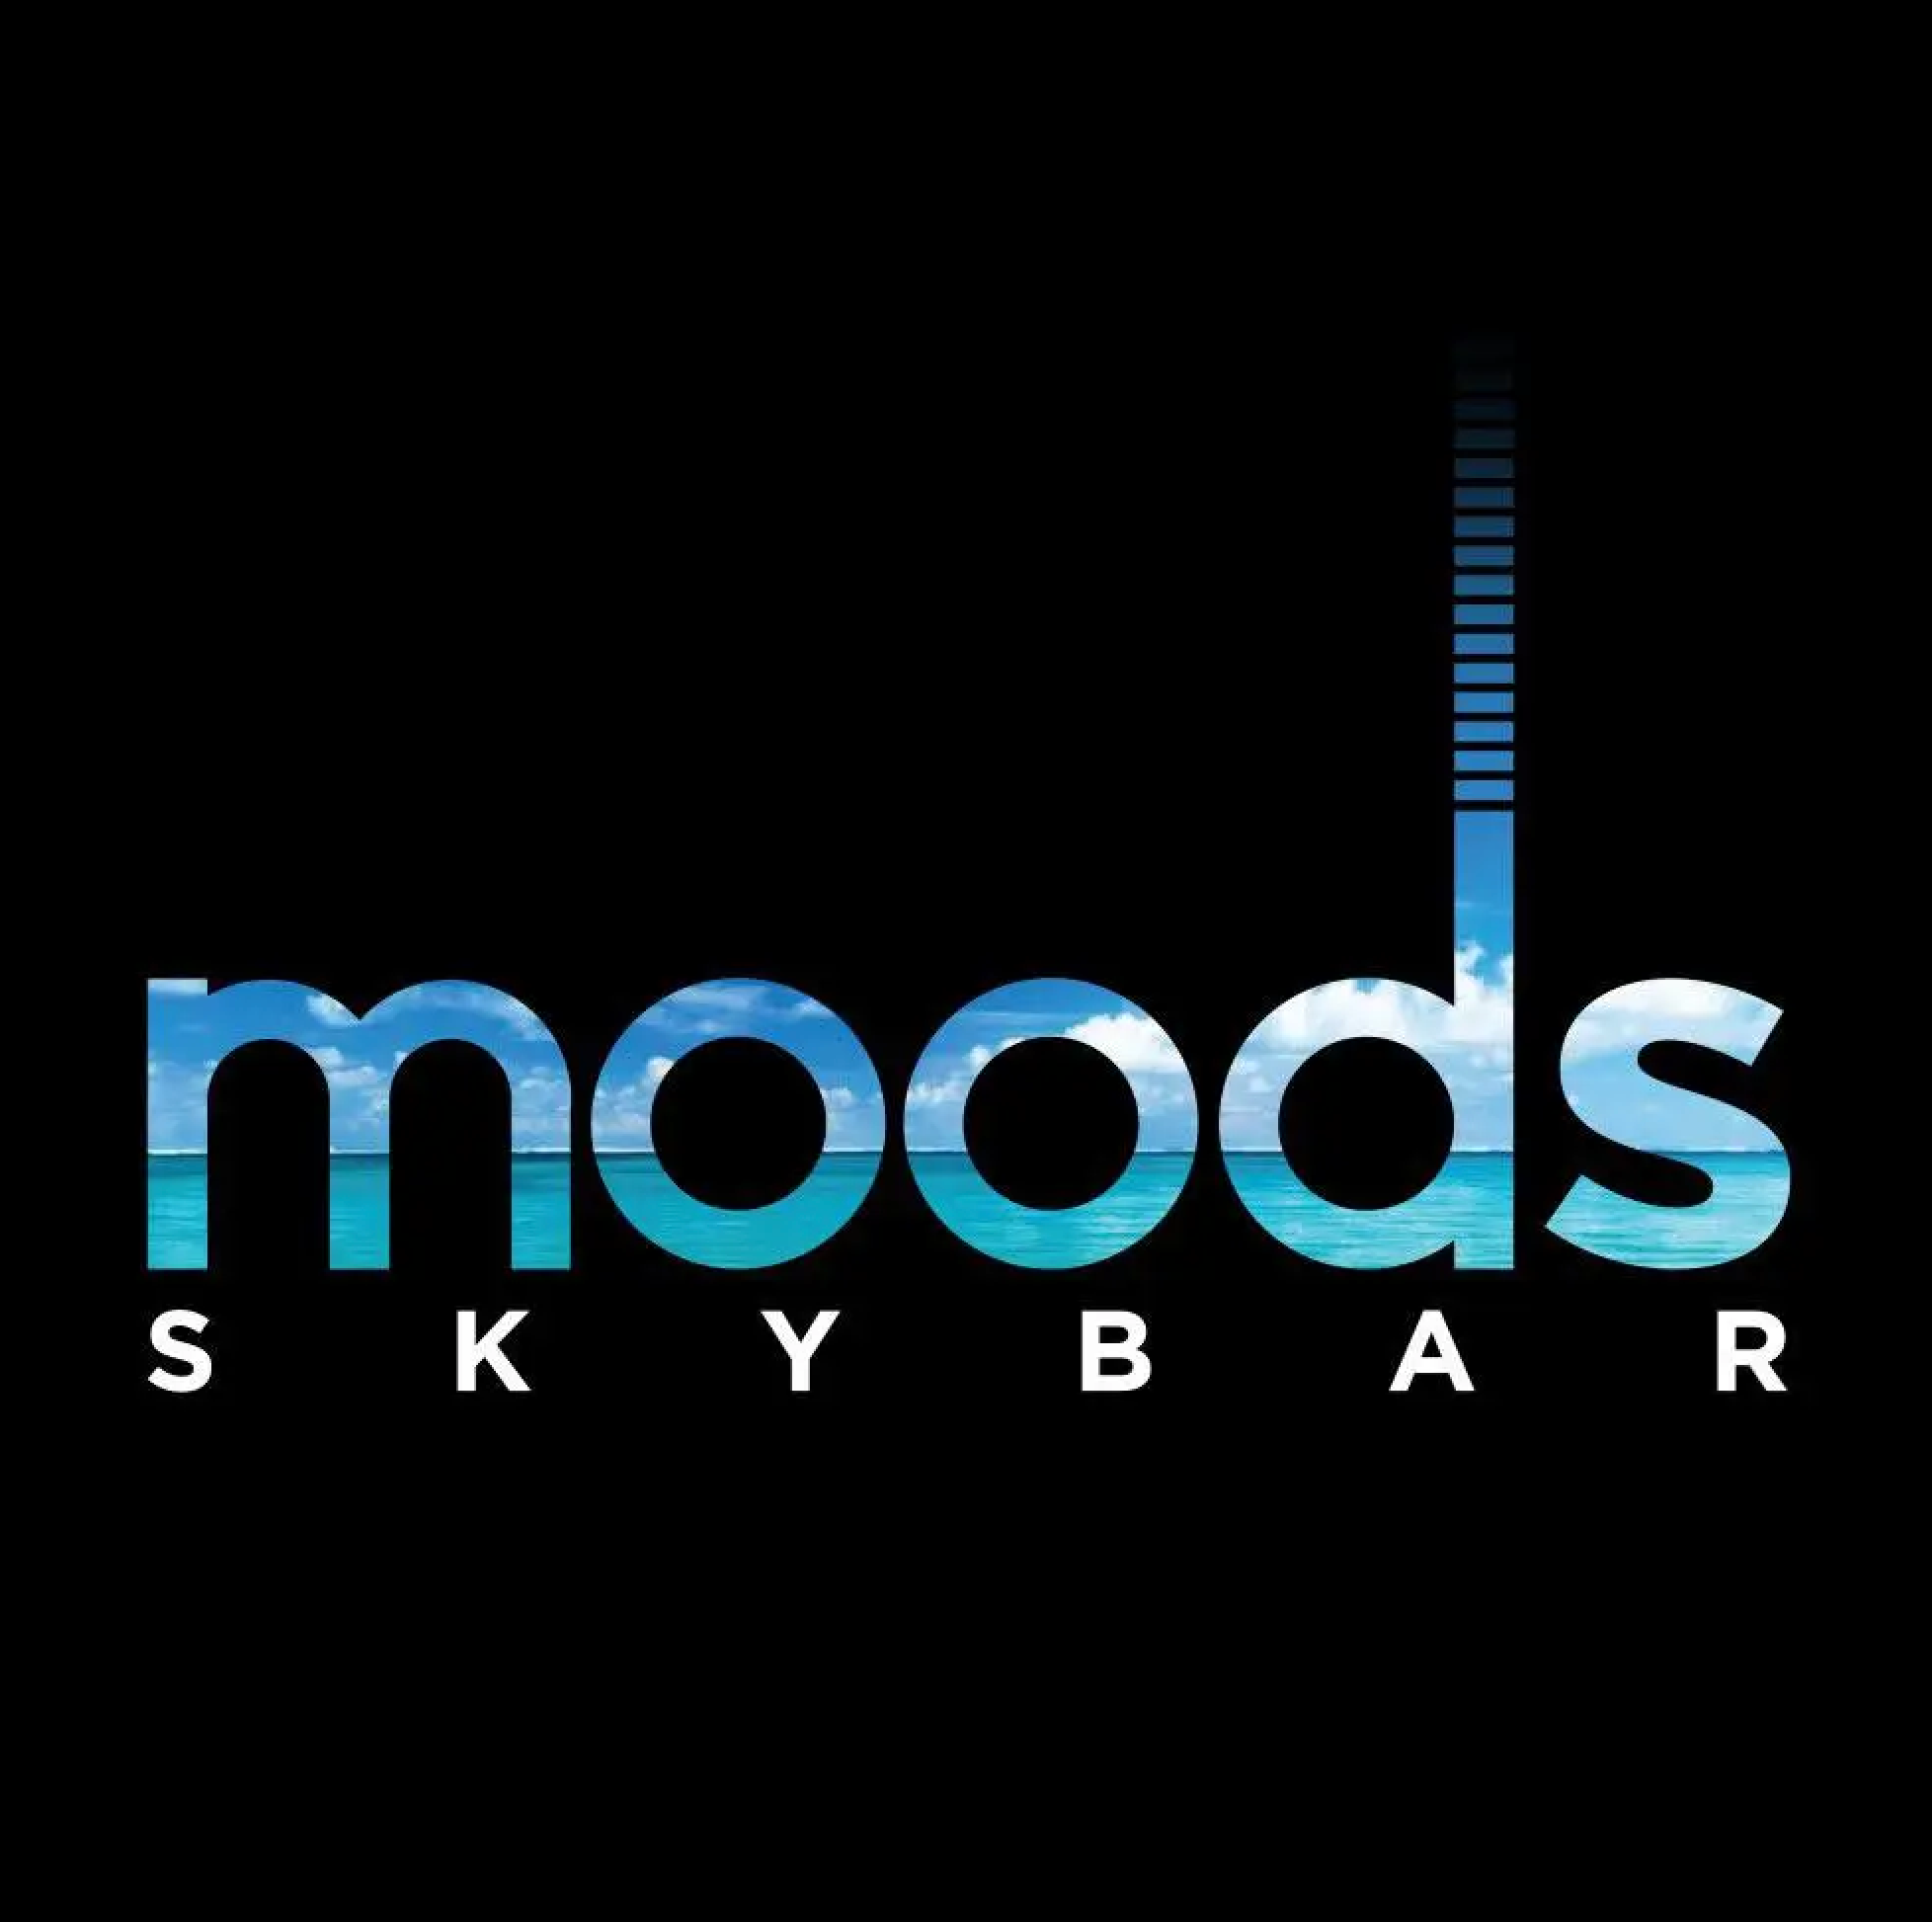 Welcome to Moods Skybar